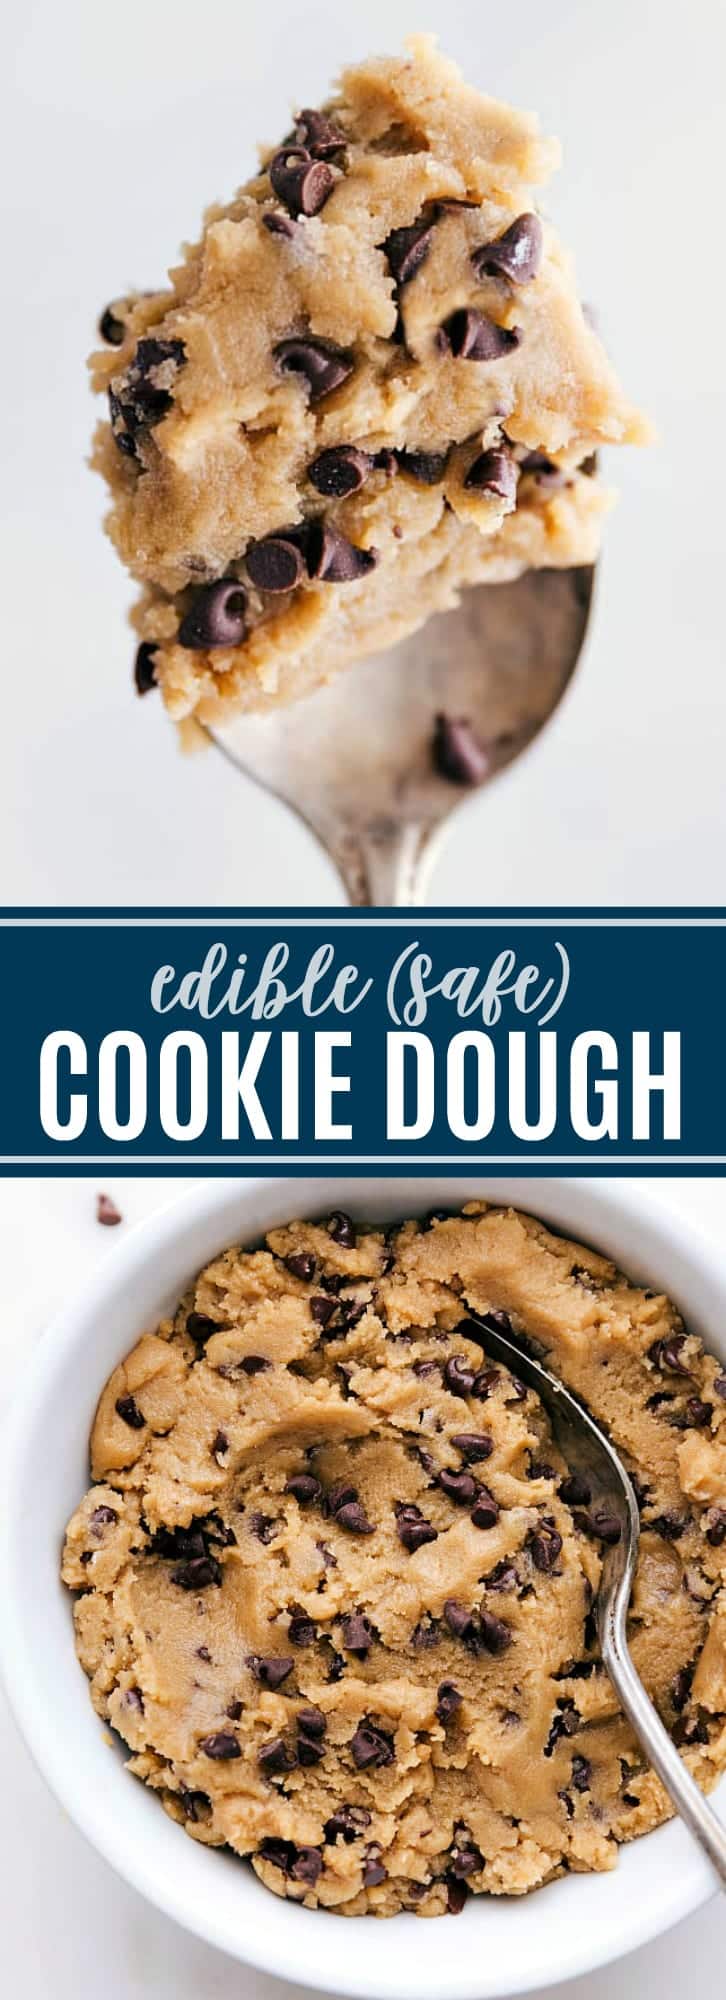 A delicious, classic chocolate chip edible cookie dough you can safely eat without baking! via chelseasmessyapron.com #cookie #dough #edible #easy #quick #chocolate #chip #safe #recipe #holiday #baking #bake